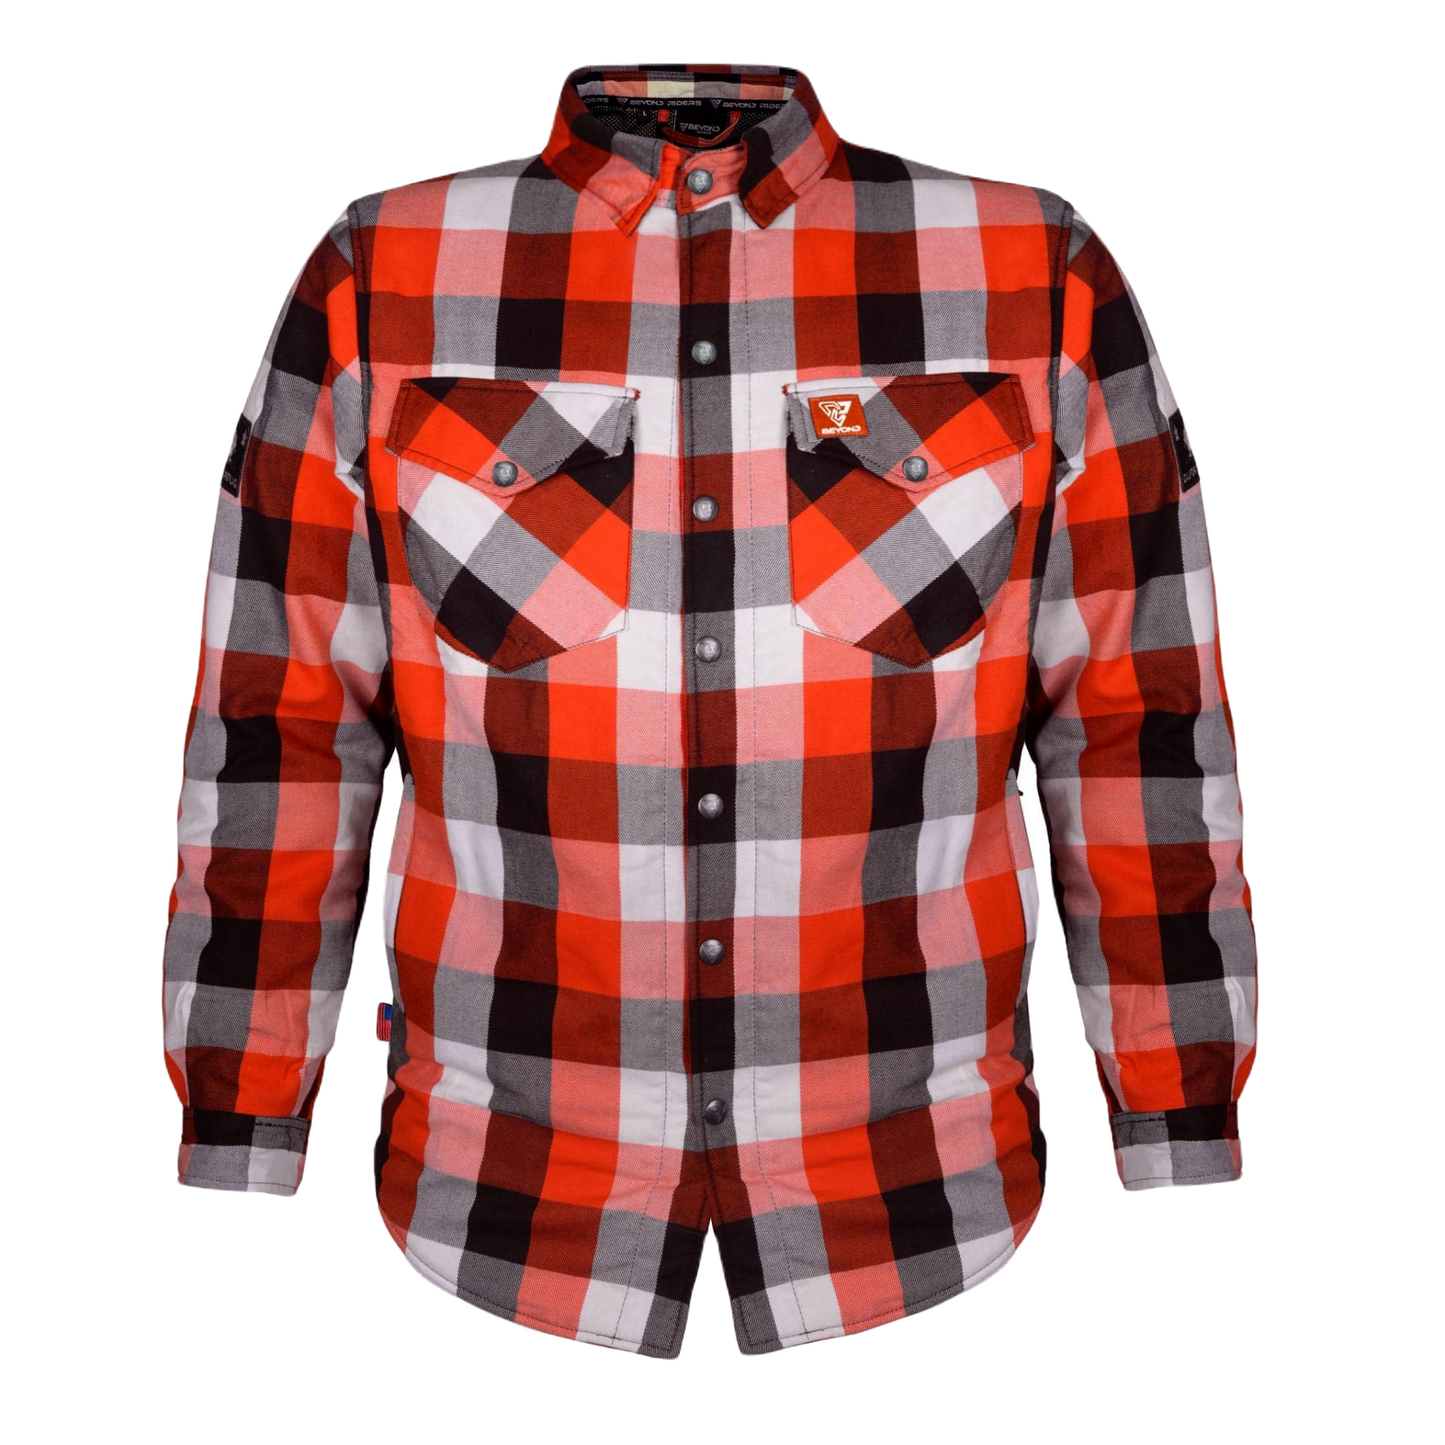 Protective Flannel Shirt "American Dream"  - Red, Black, White Checkered with Level 1 Pads